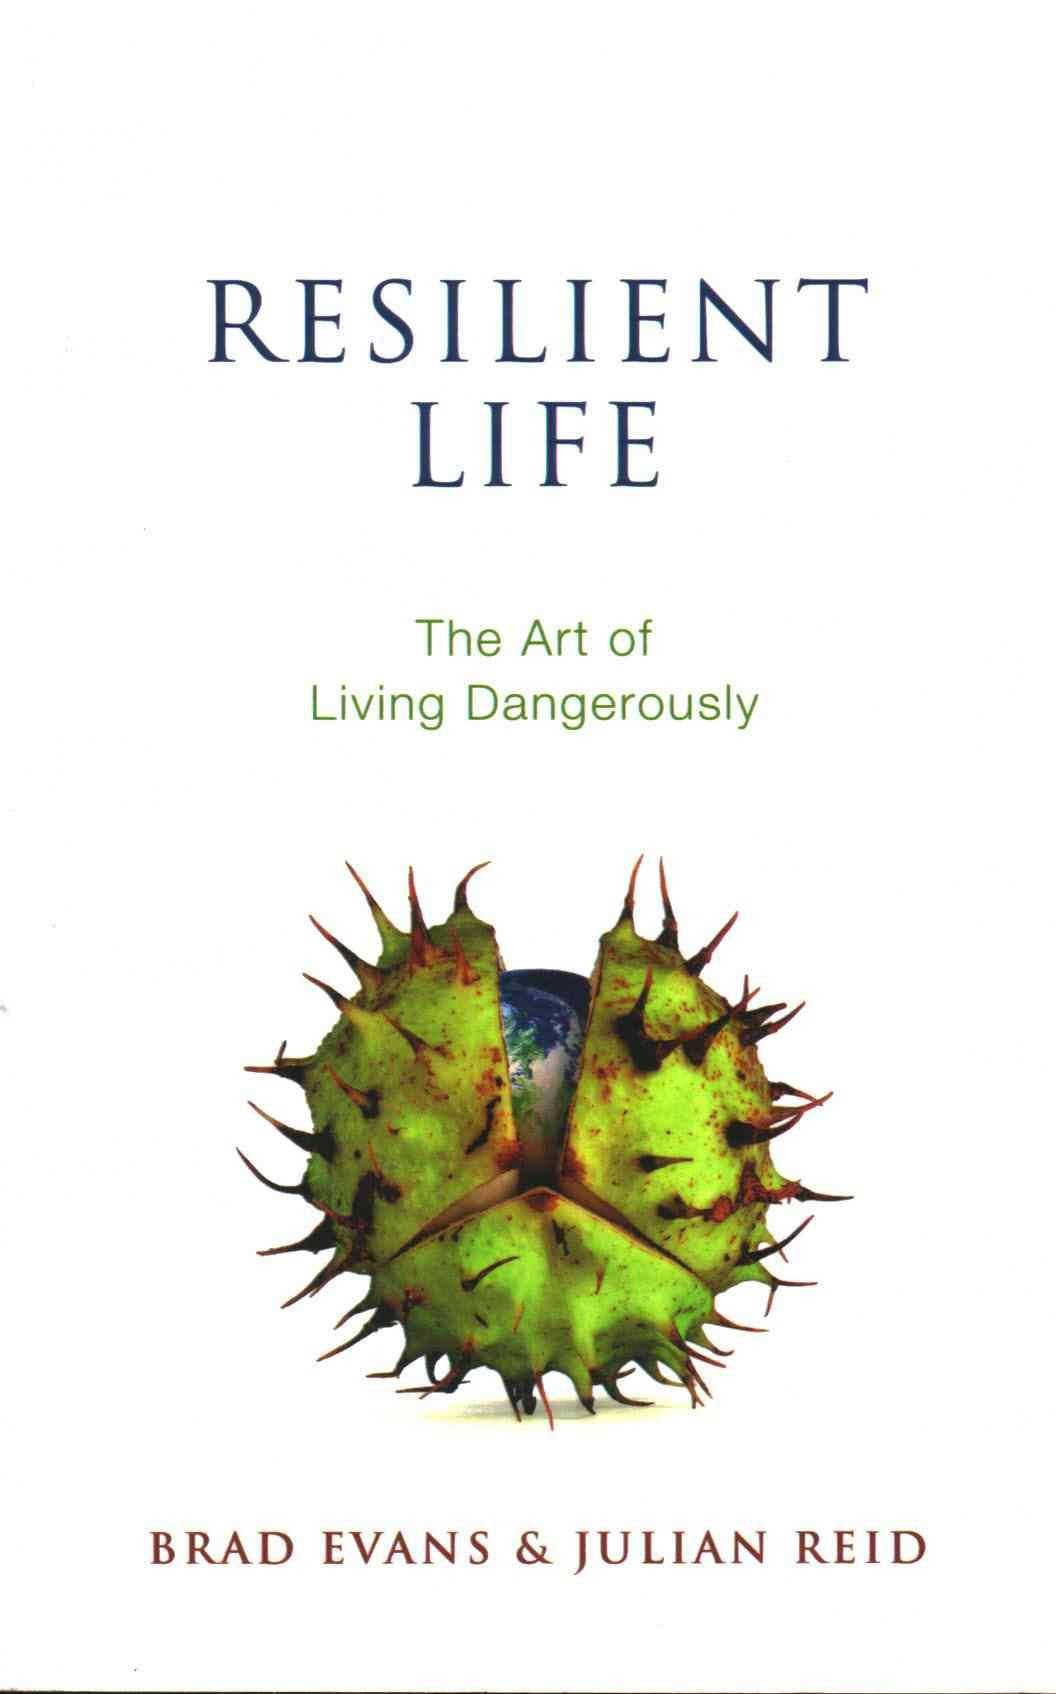 Resilient Life - The Art of Living Dangerously